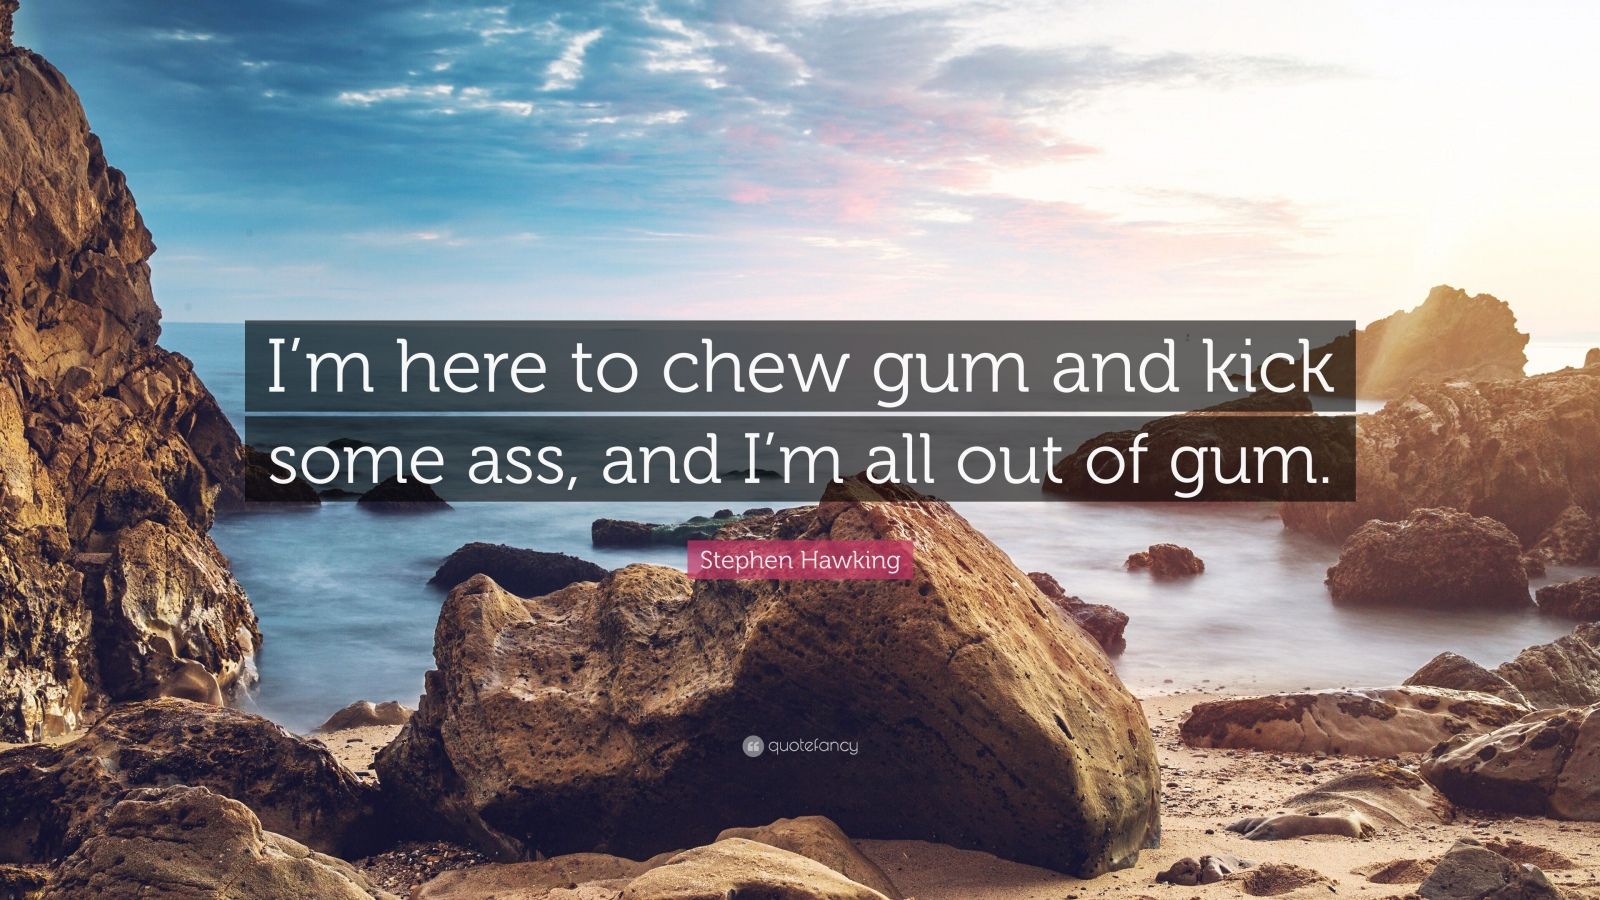 Stephen Hawking Quote: "I'm here to chew gum and kick some ass, and I'm all out of gum." (12 ...